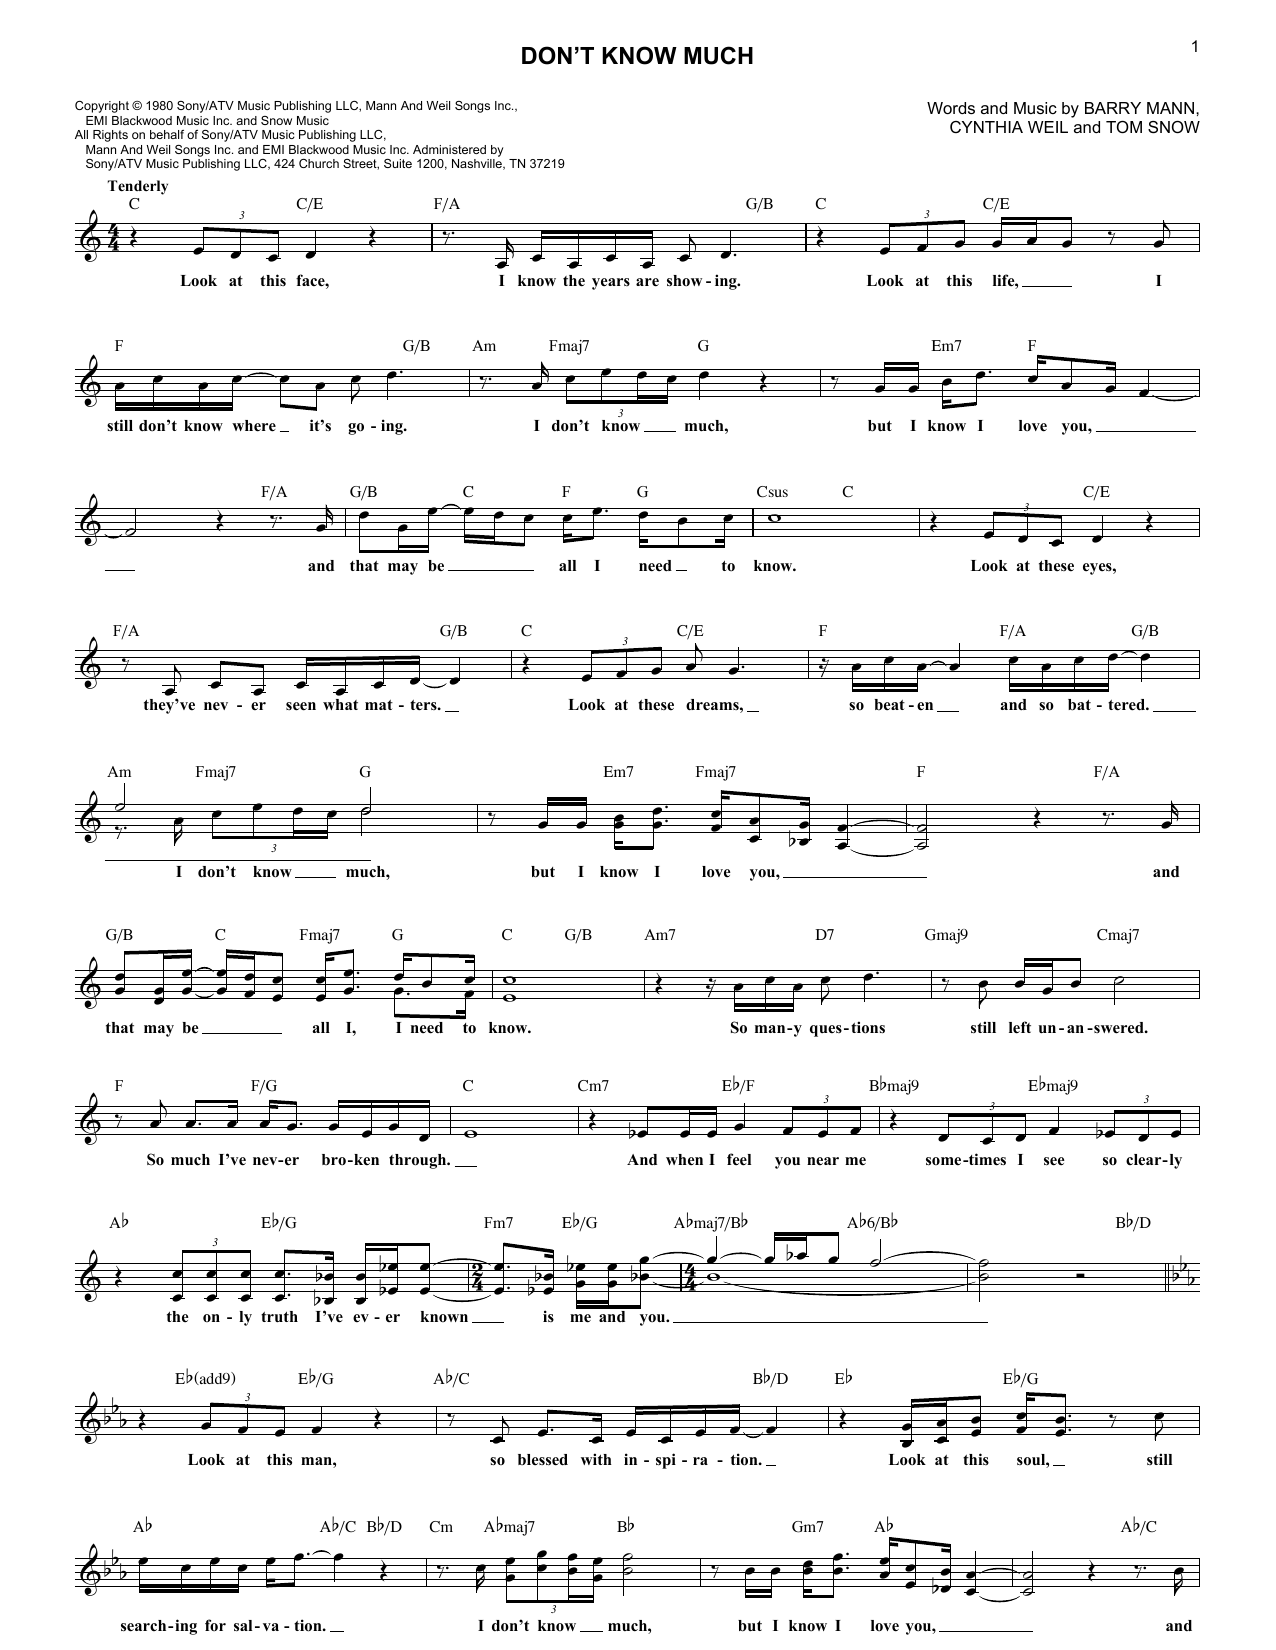 Download Linda Ronstadt & Aaron Neville Don't Know Much Sheet Music